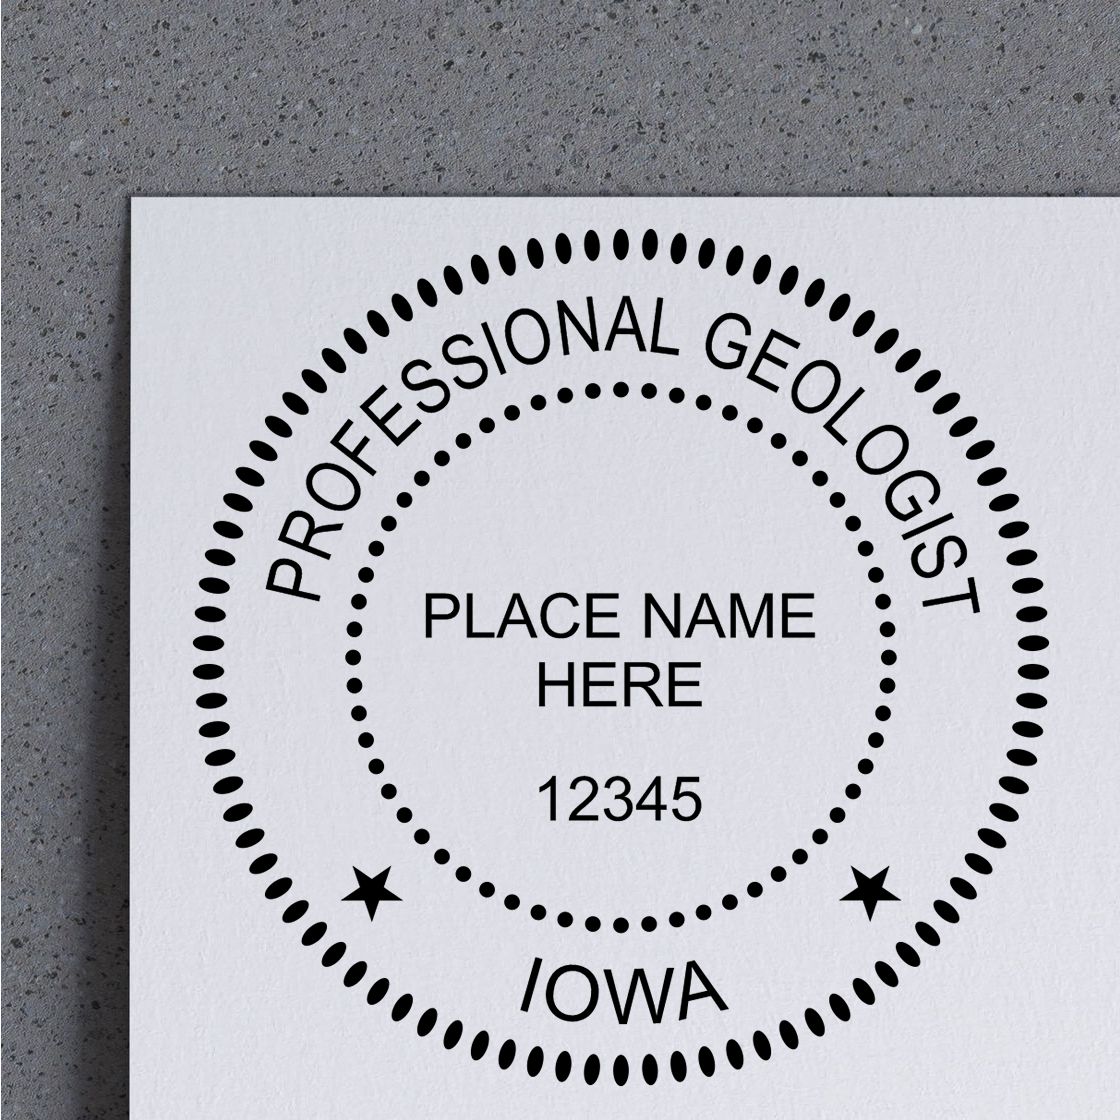 A lifestyle photo showing a stamped image of the Slim Pre-Inked Iowa Professional Geologist Seal Stamp on a piece of paper